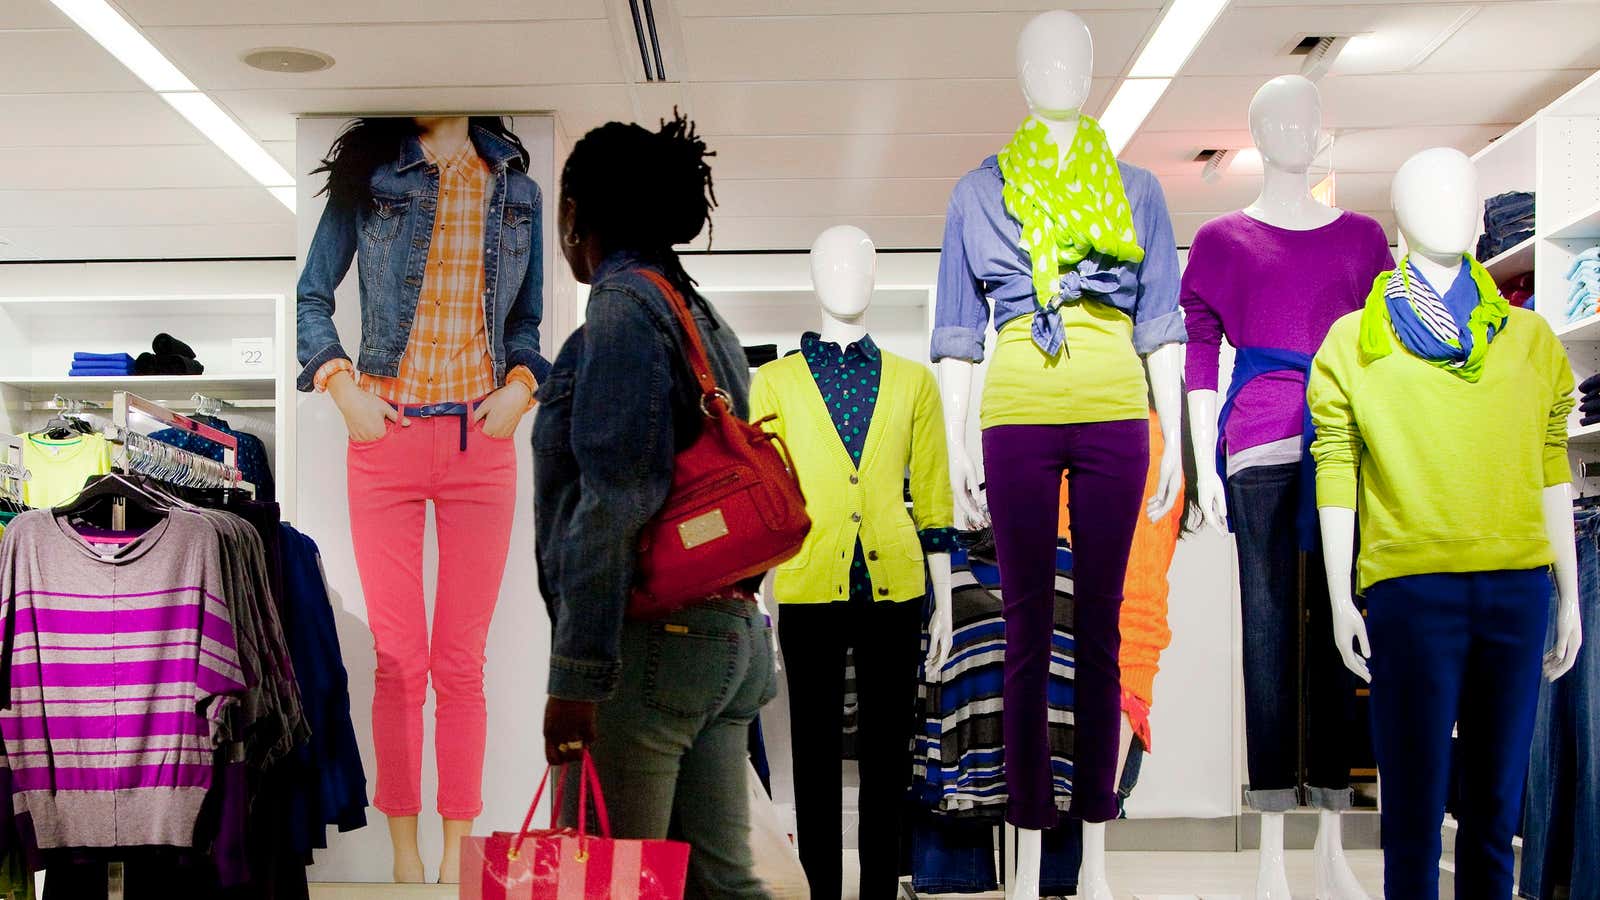 Shoppers have yet to buy into JC Penney’s turnaround